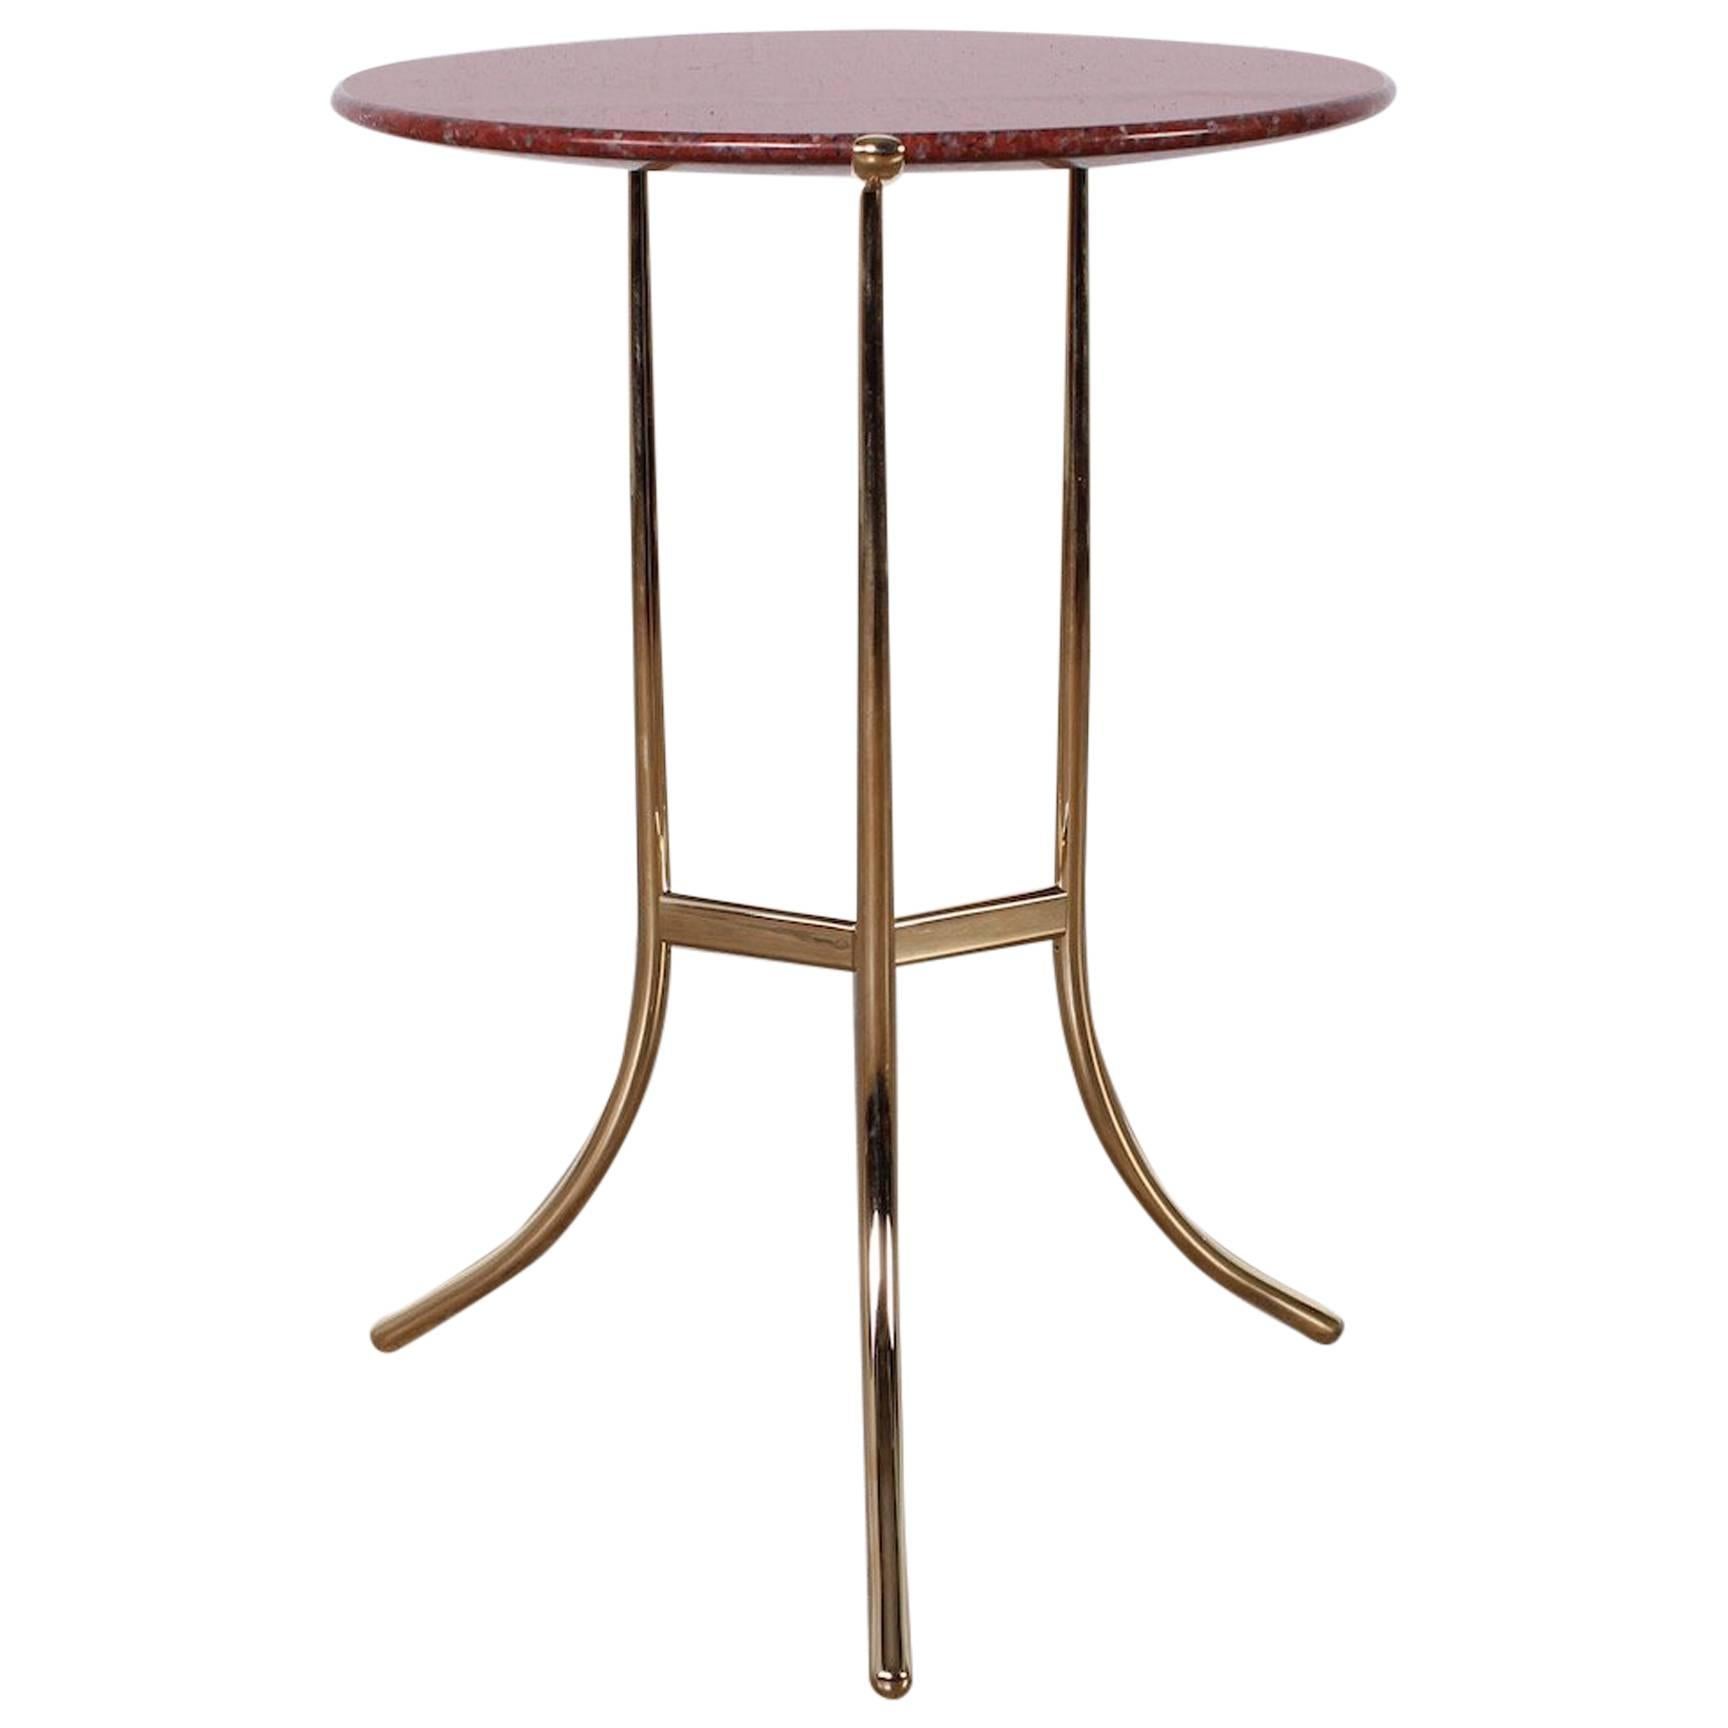 Cedric Hartman Table in Polished Brass and Rosso Granite